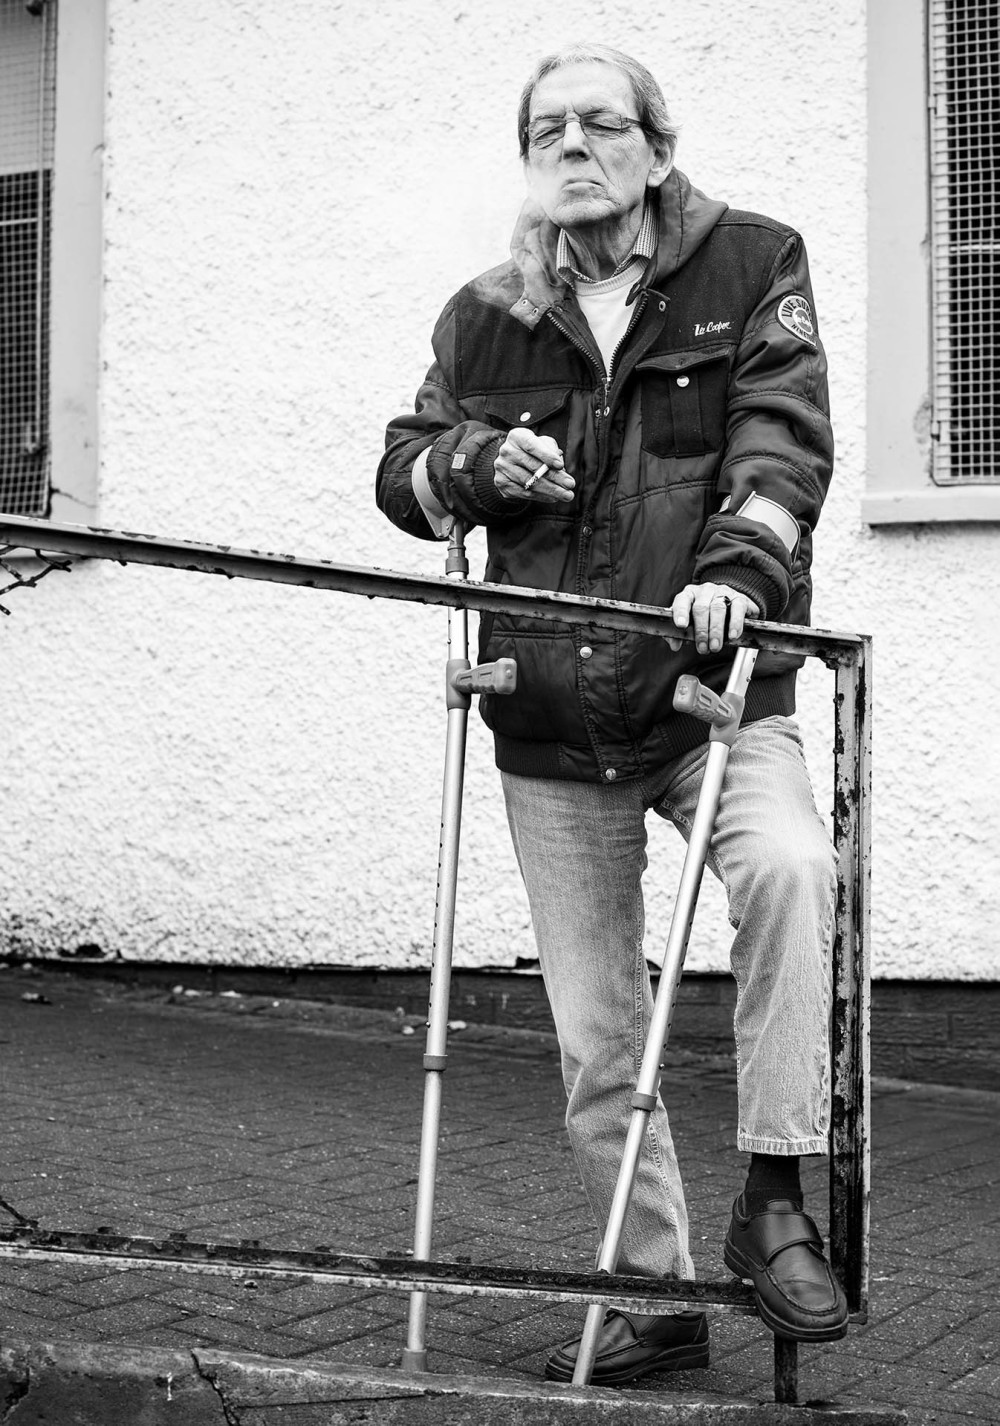 Michael, a service user at Men's Shed, Paisley. Photographed for Shelter Scotland's 50th anniversary by Melissa Mitchell.